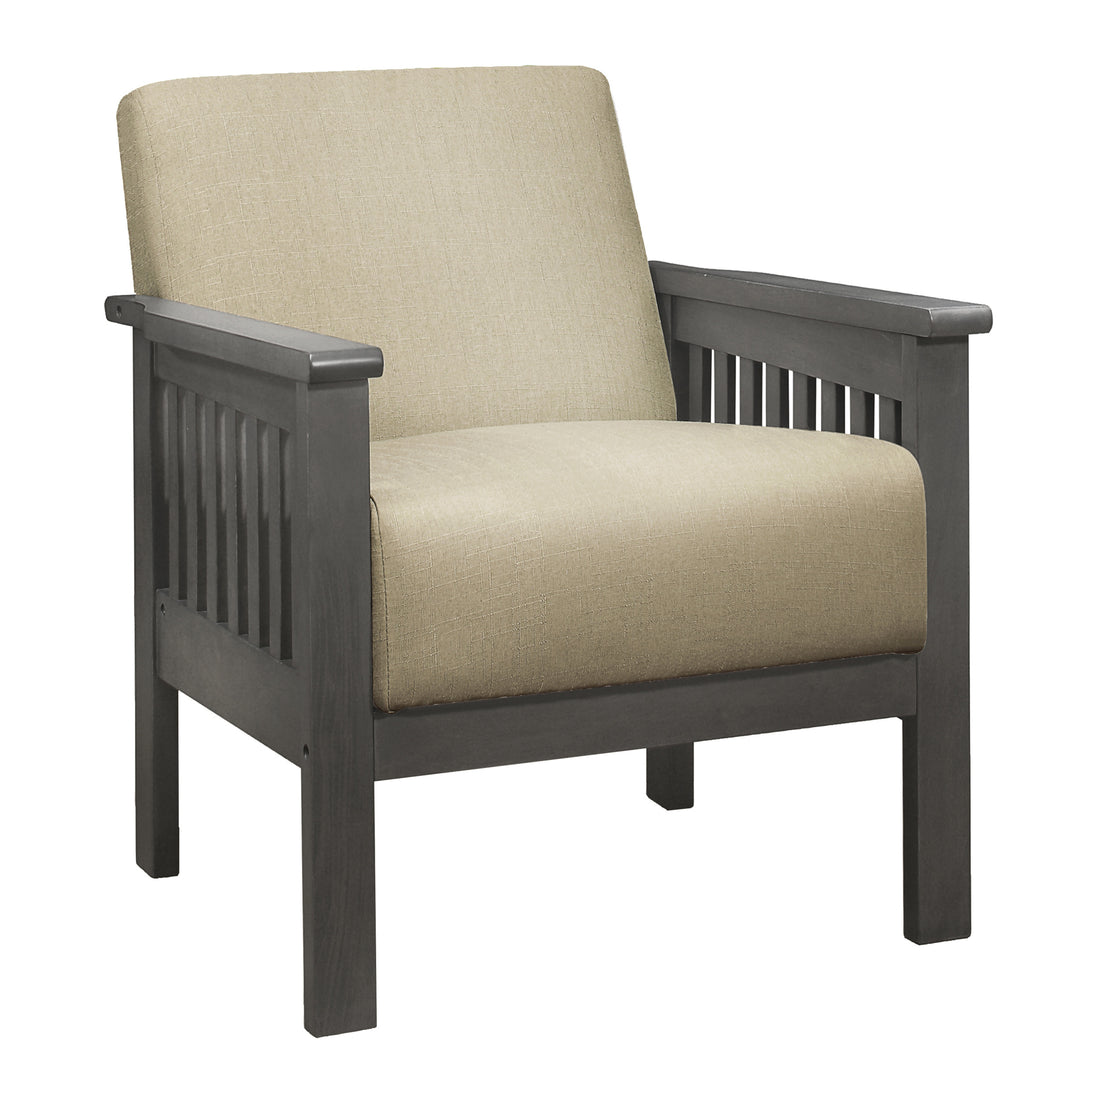 Gray Accent Chair 1pc Solid Wood Mission Arm Cushion gray-primary living